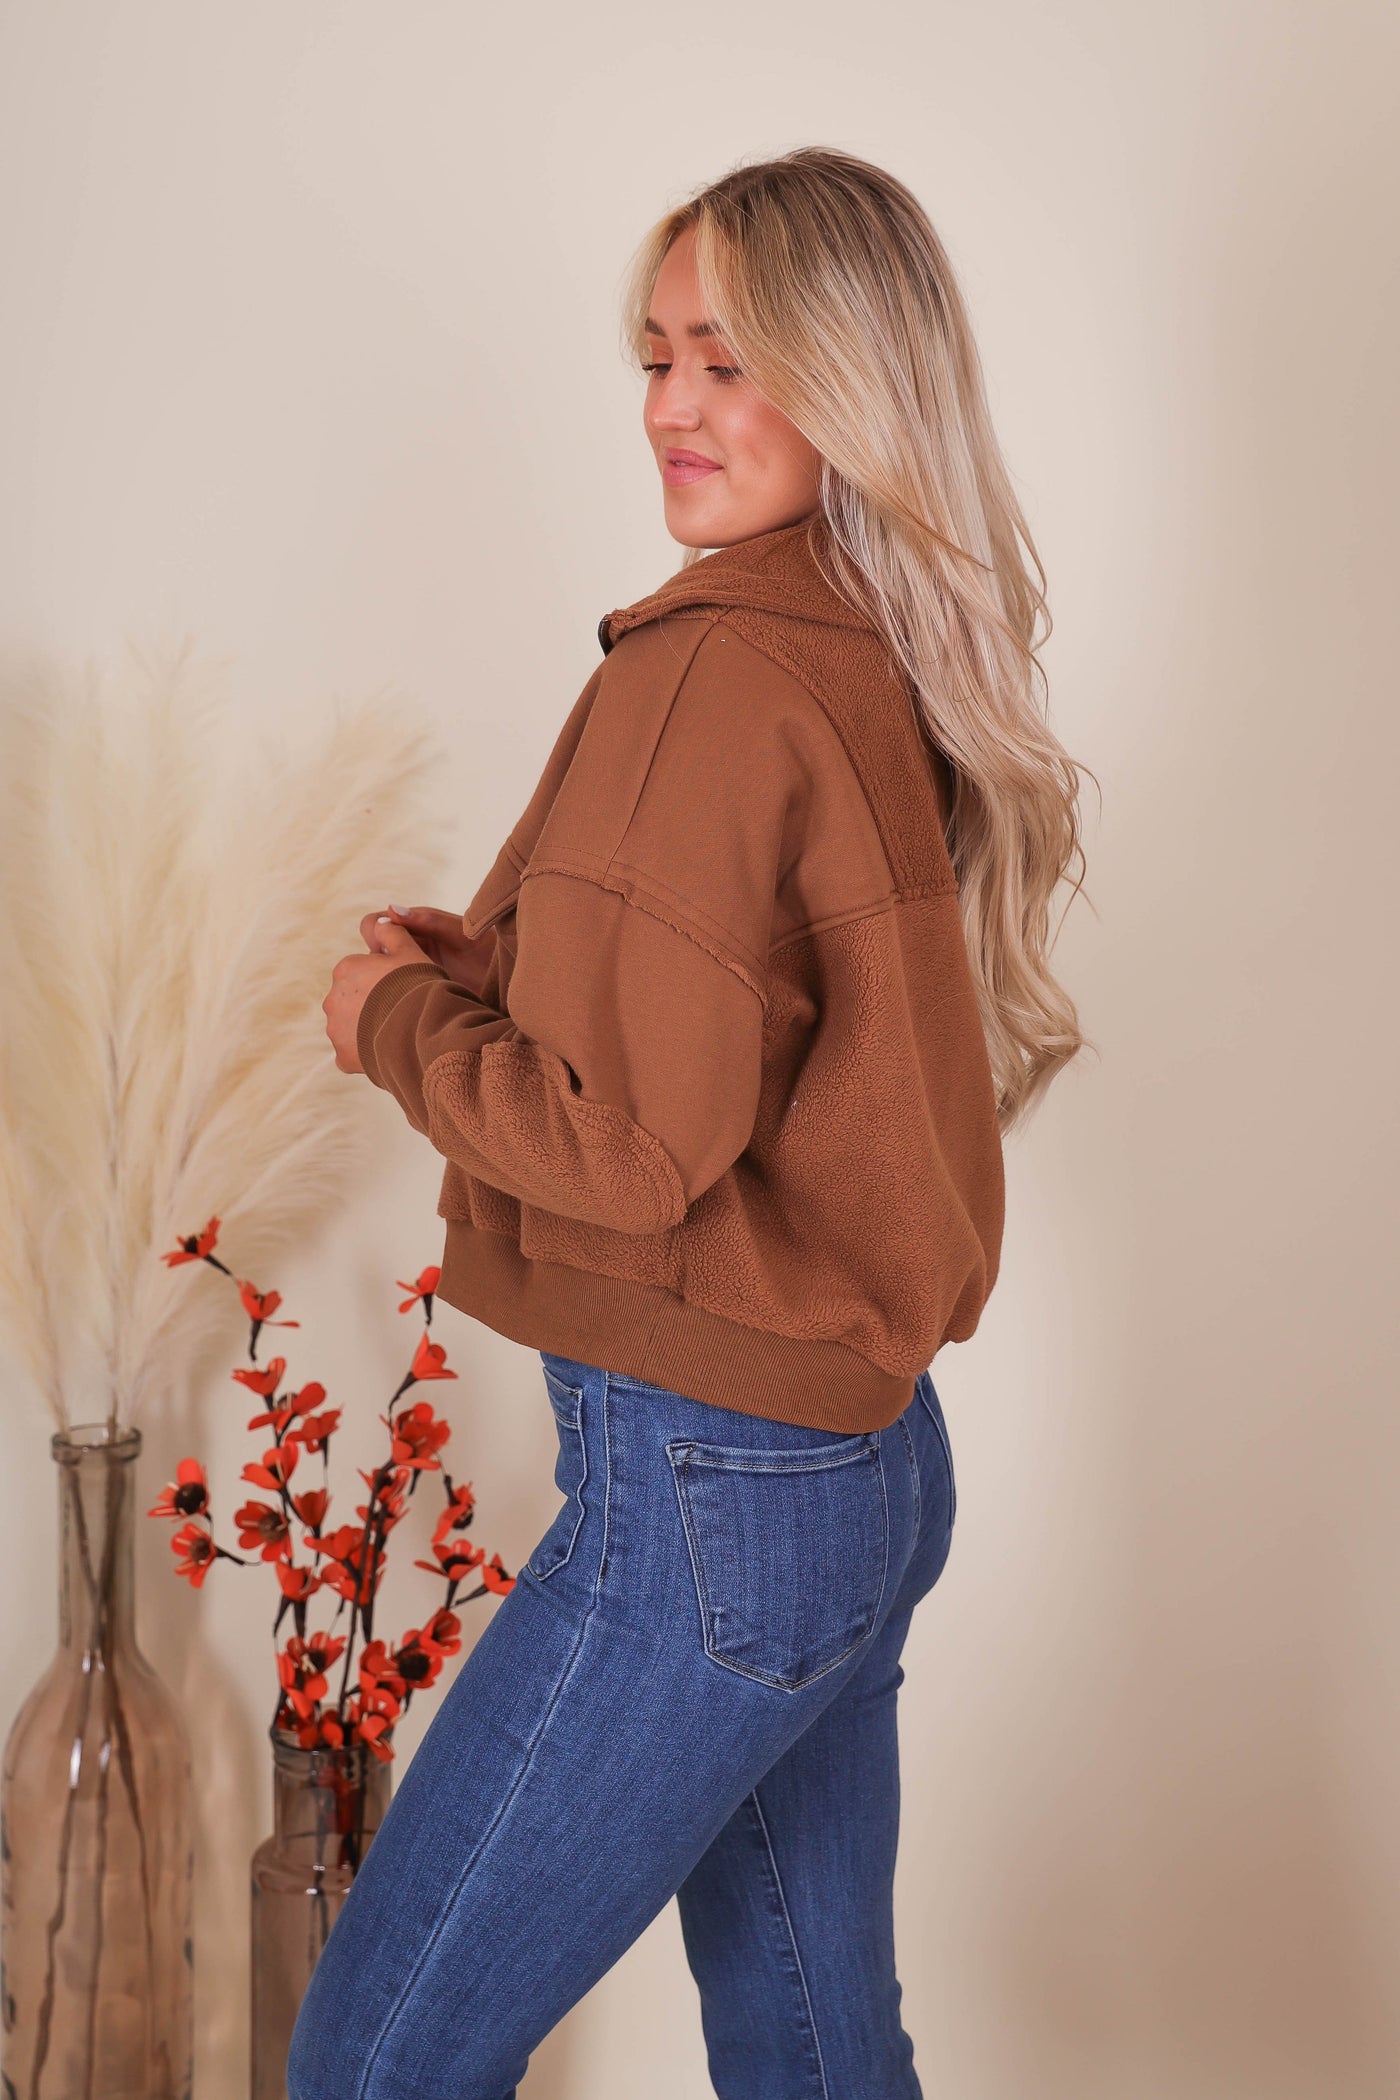 Women's Brown Sherpa Pullover- Quarter Zip Pullover with Chest Pockets